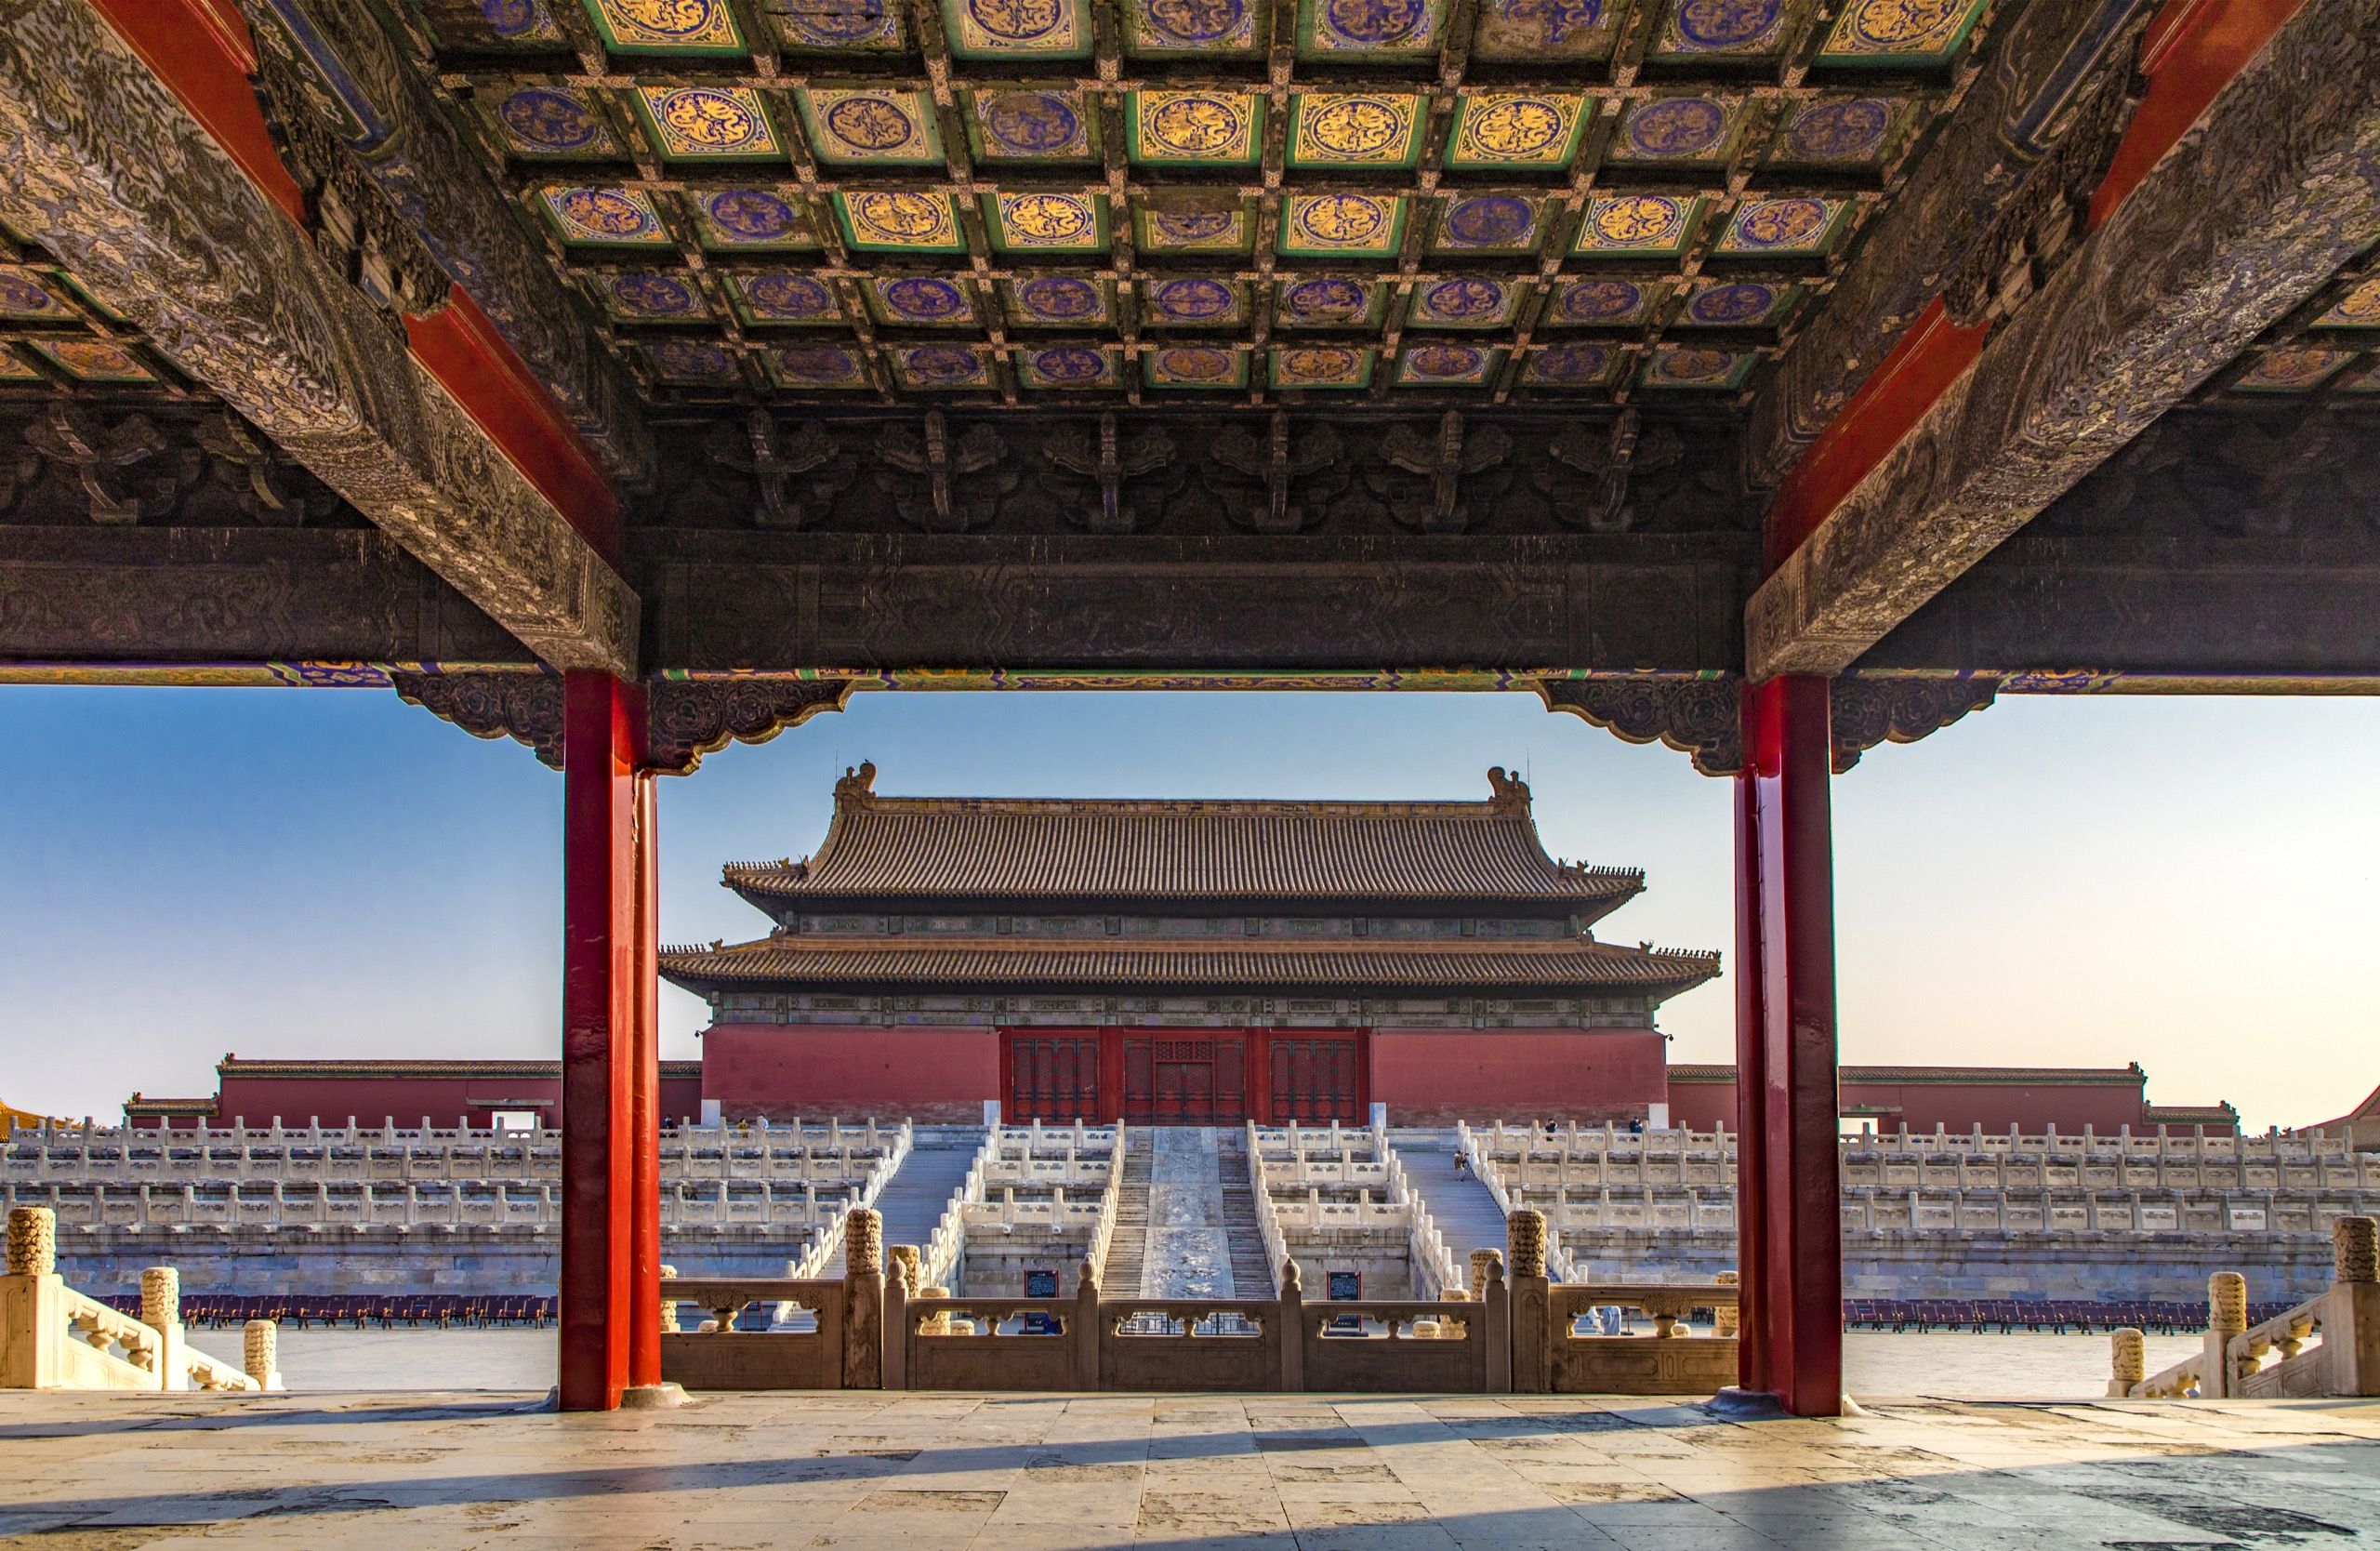 China's Forbidden City: 10 Things You Need to Know